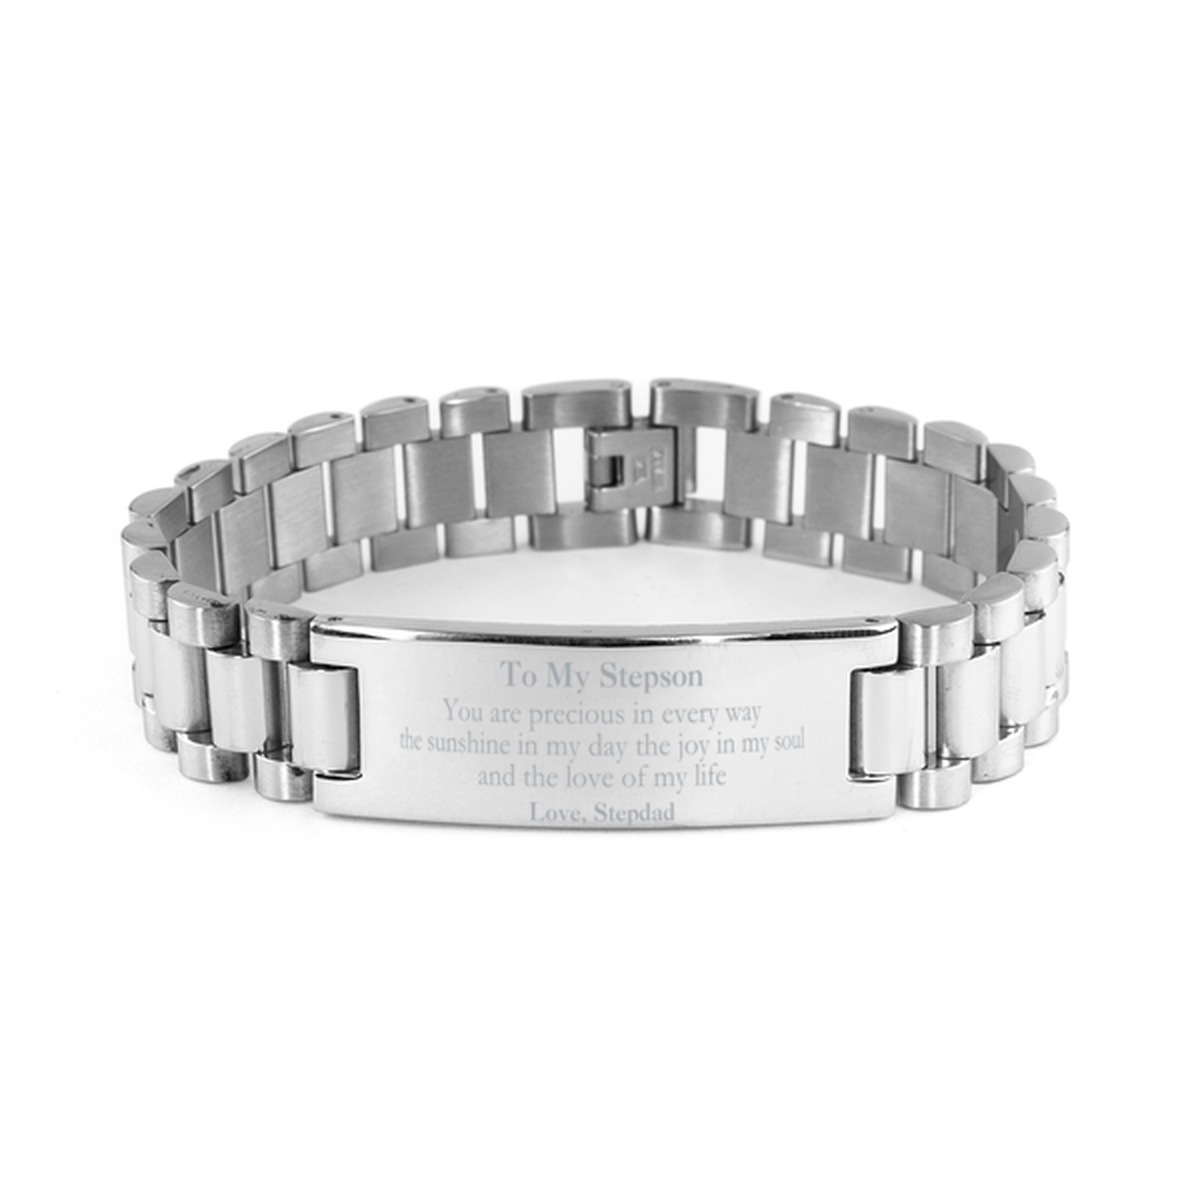 Graduation Gifts for Stepson Ladder Stainless Steel Bracelet Present from Stepdad, Christmas Stepson Birthday Gifts Stepson You are precious in every way the sunshine in my day. Love, Stepdad